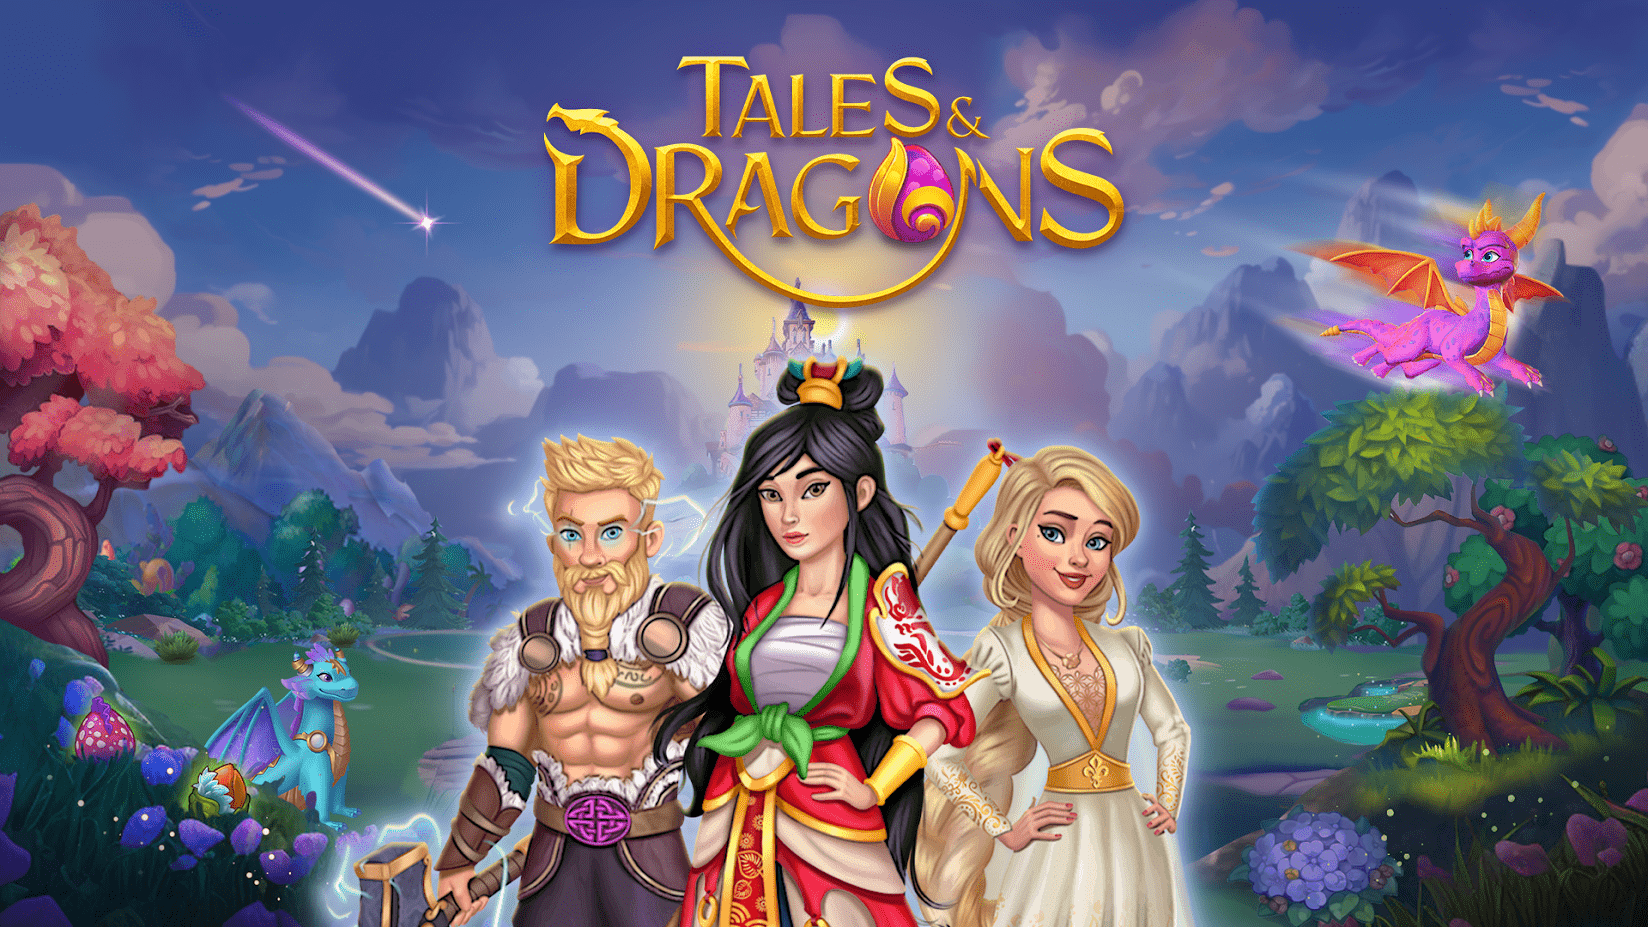 Tales and Dragons Merge Game